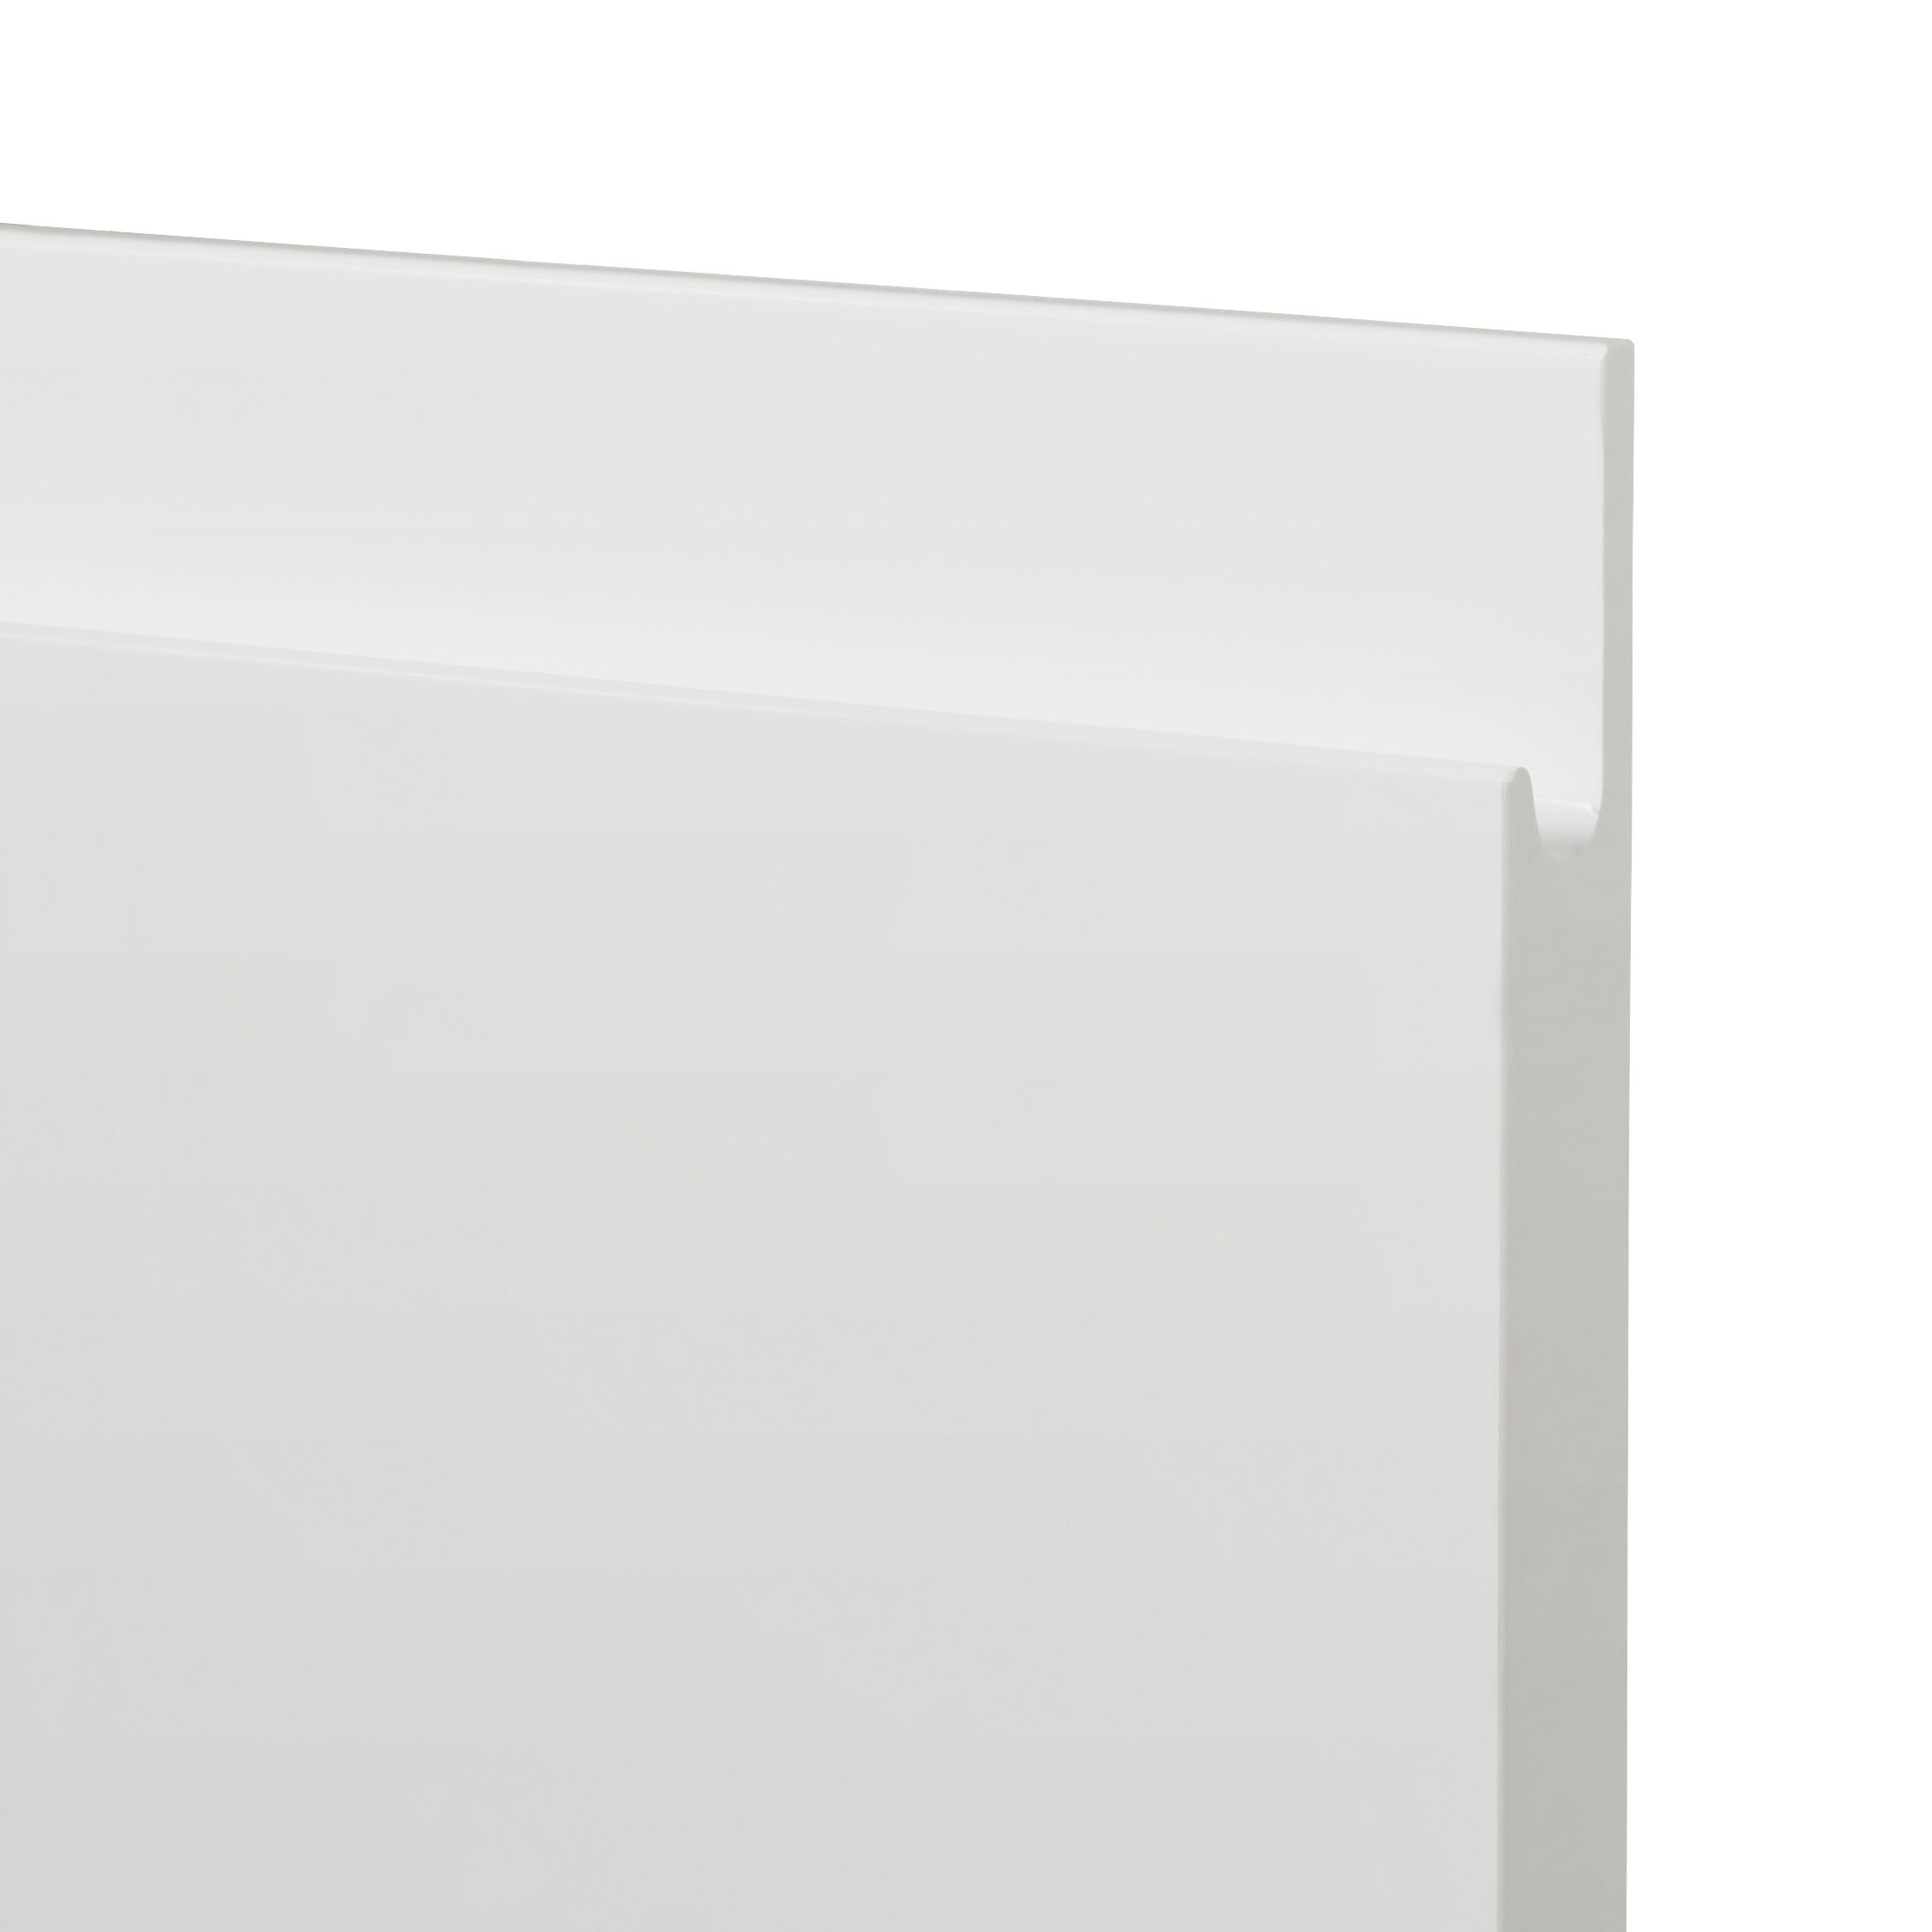 GoodHome Garcinia Gloss white integrated handle Tall larder Cabinet door (W)600mm (H)1181mm (T)19mm